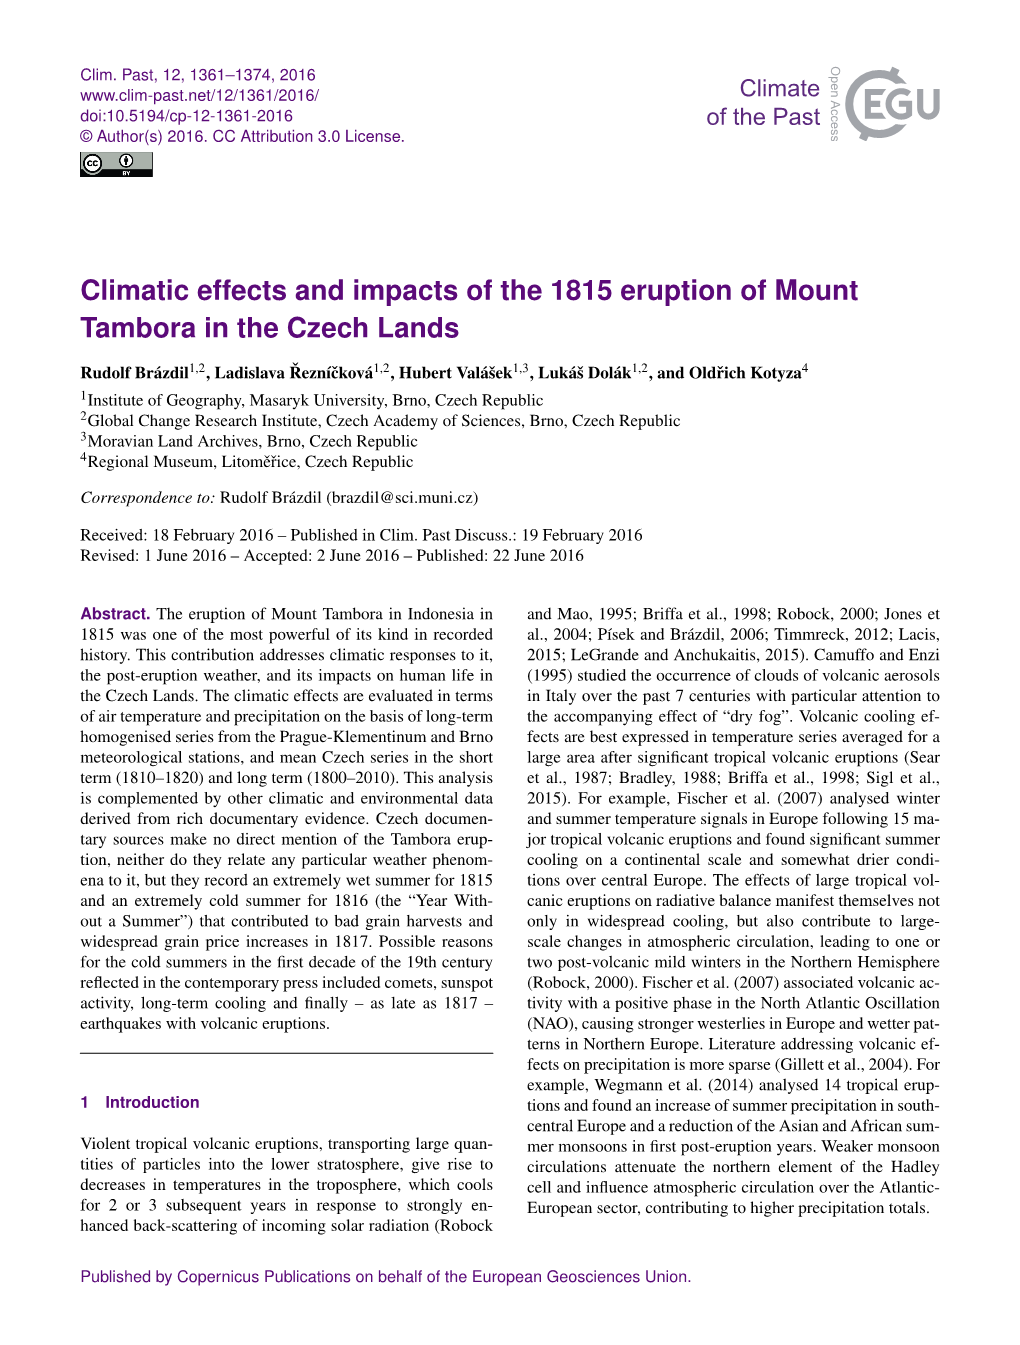 Climatic Effects and Impacts of the 1815 Eruption of Mount Tambora in the Czech Lands